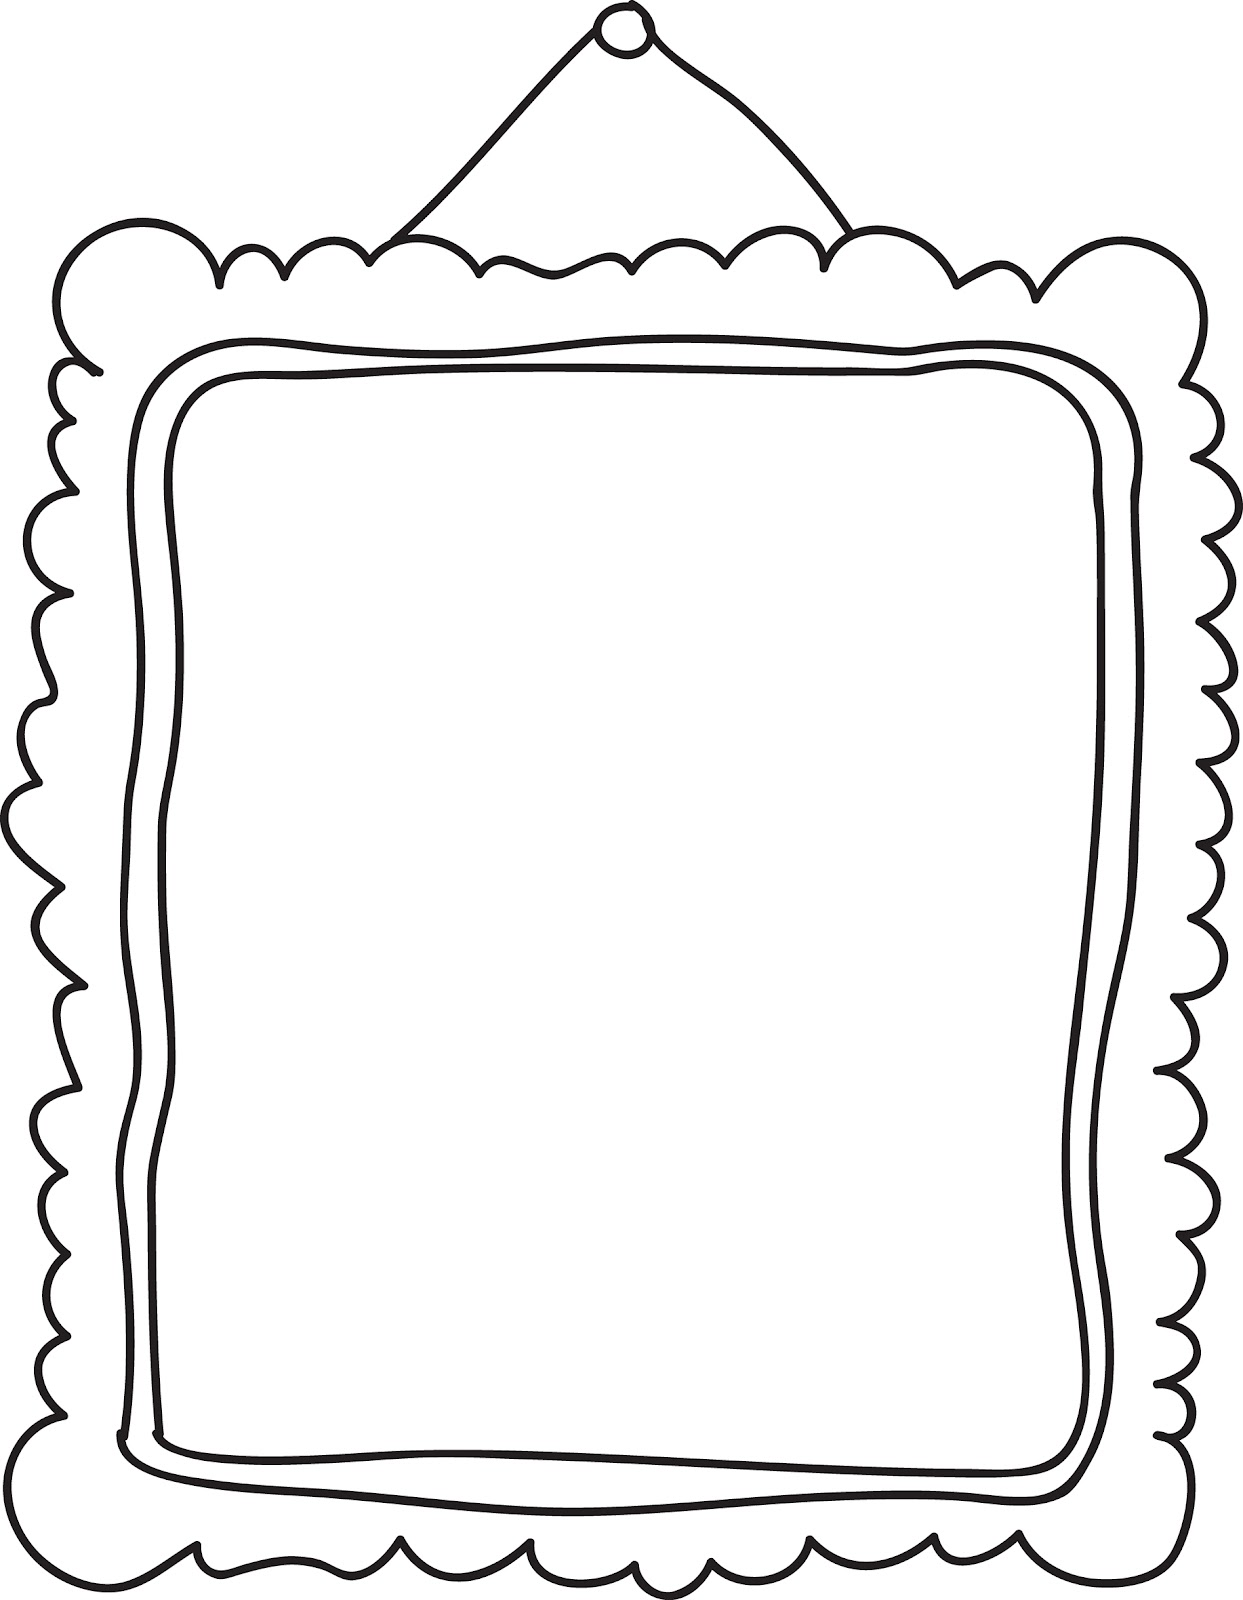 Pink wavy stitched frame clip art blank labels - Cliparting.com